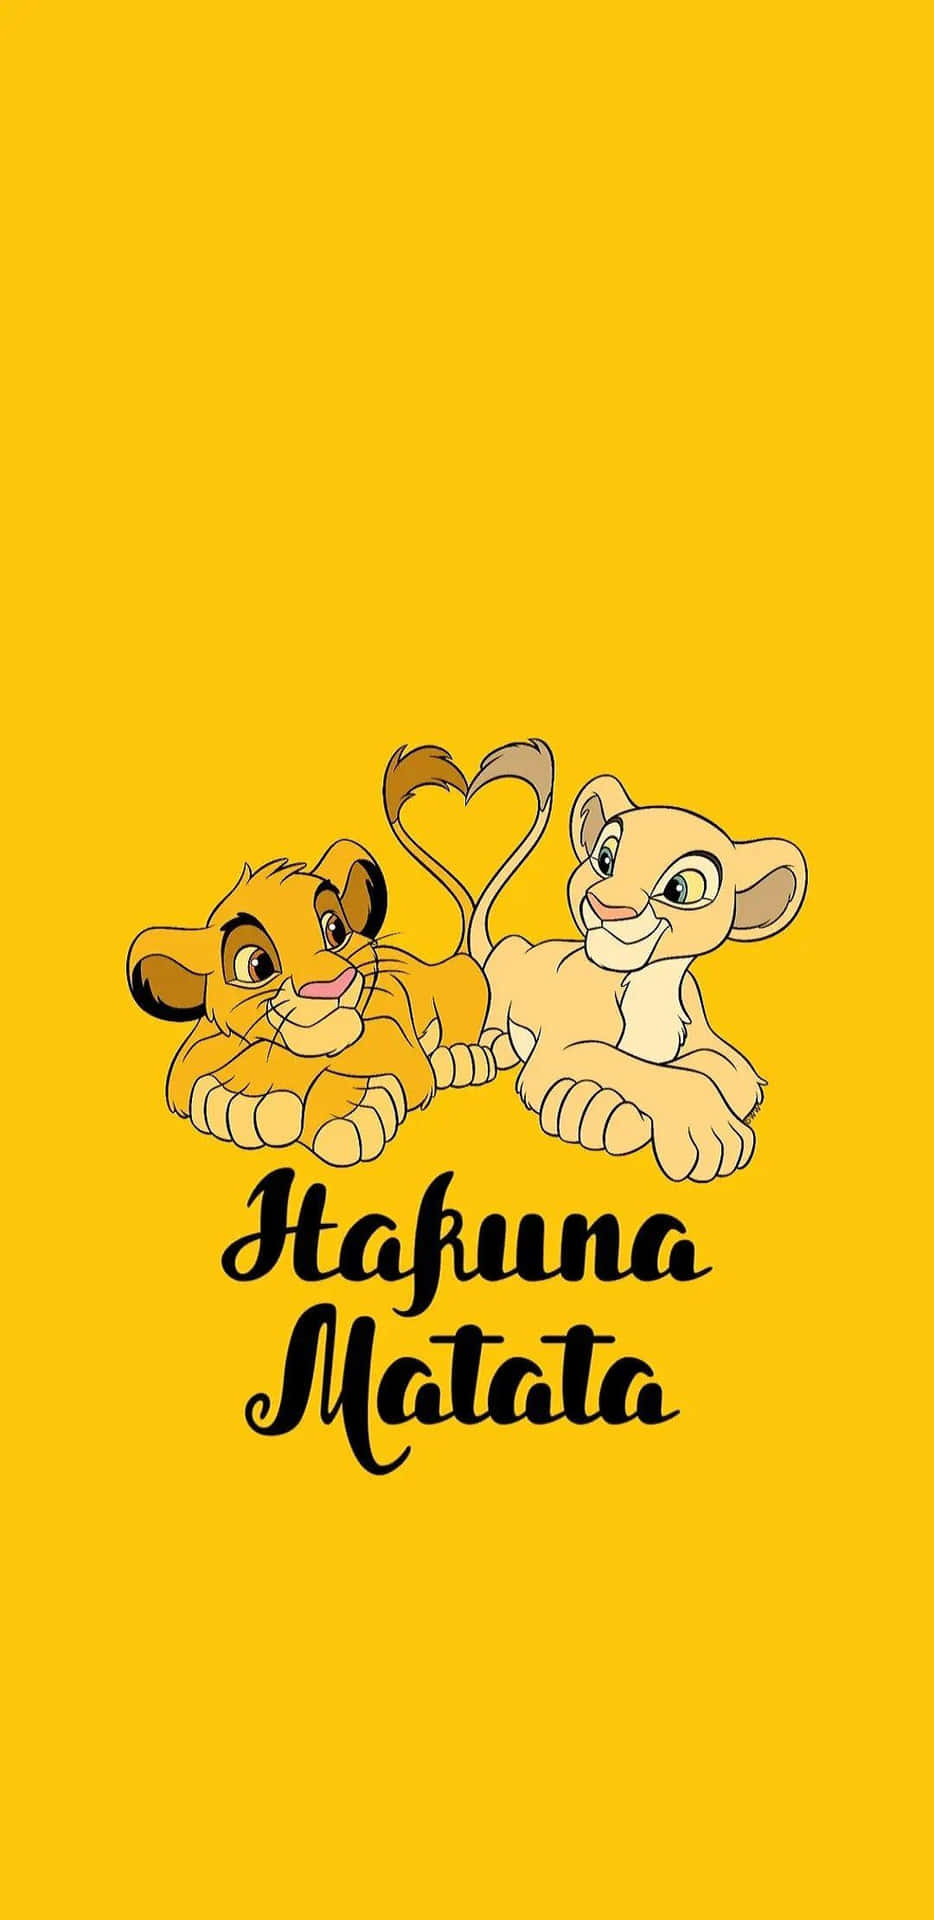 Cartoons Disney The Lion King Simba Nala Timon And PumbaMatte Finish Poster  Paper Print  Animation  Cartoons posters in India  Buy art film  design movie music nature and educational paintingswallpapers